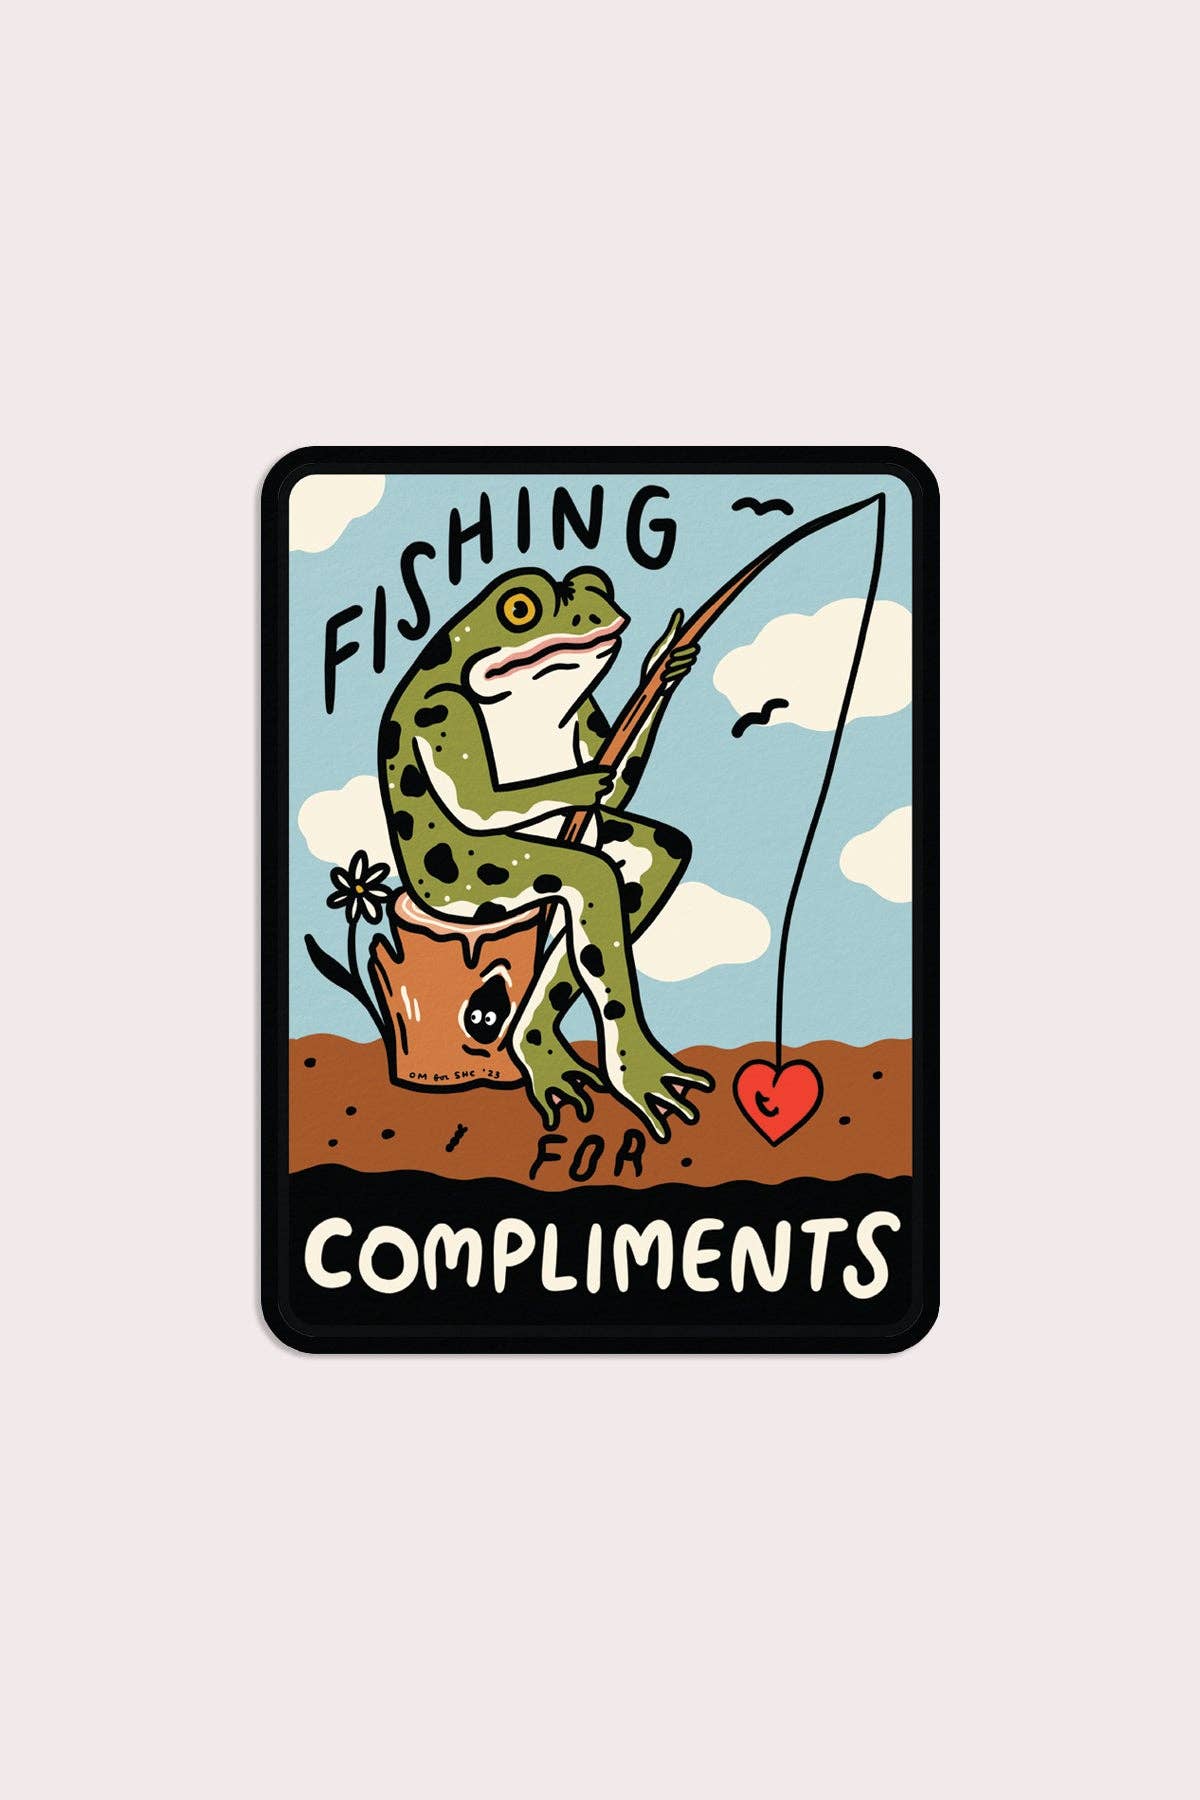 Fishing for Compliments Vinyl Sticker - Out of the Blue